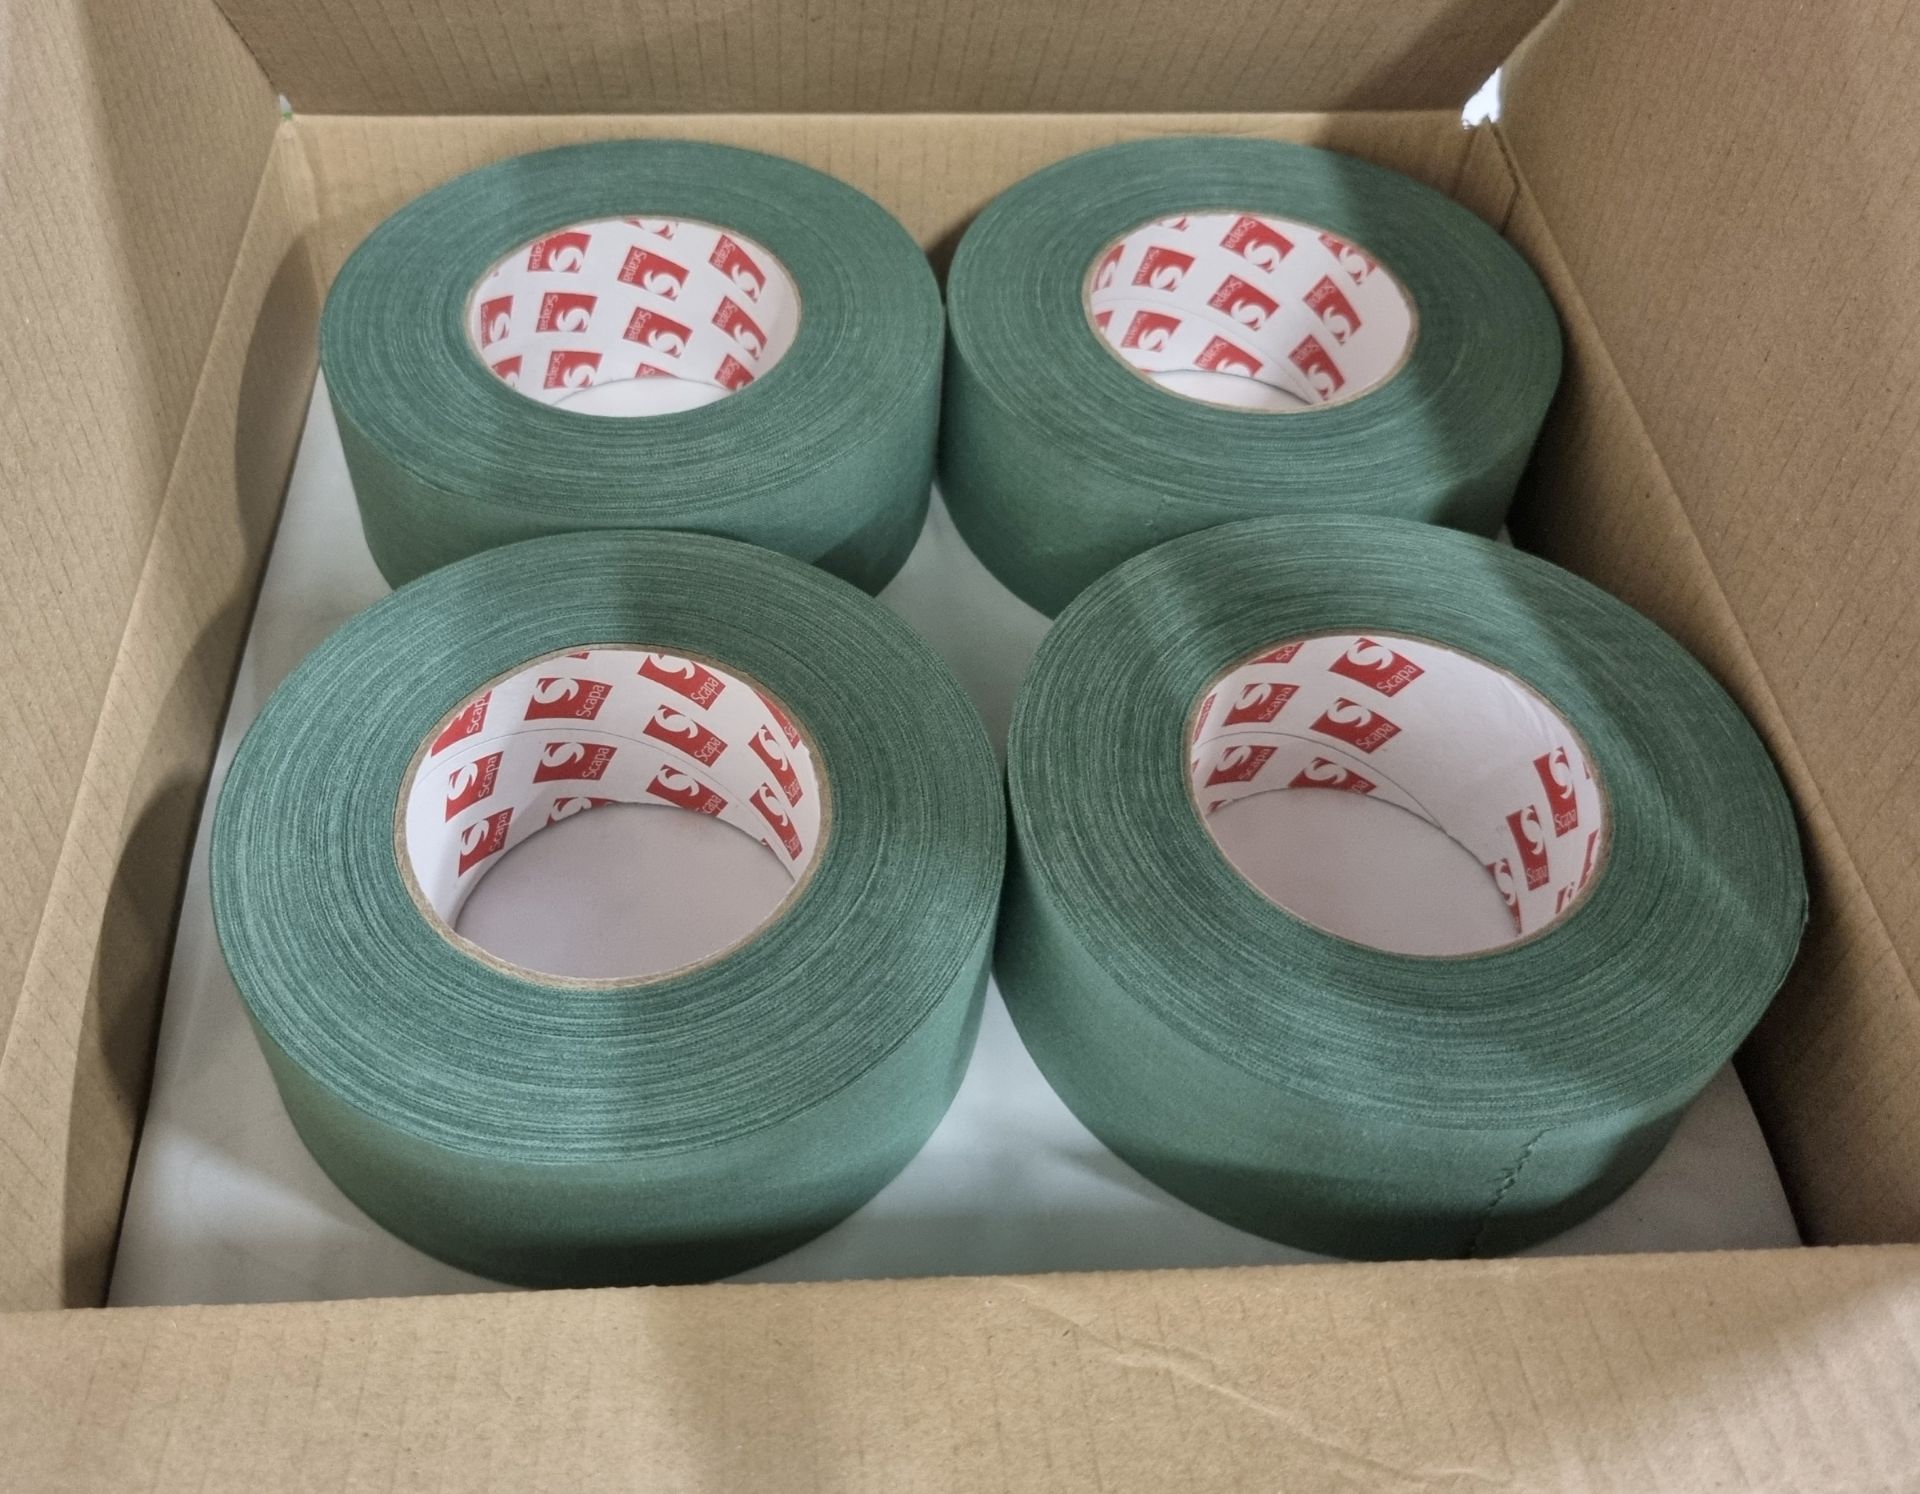 4x boxes of Scapa 3302 uncoated cotton cloth adhesive tape - olive green - 50mm x 50m - Image 3 of 3